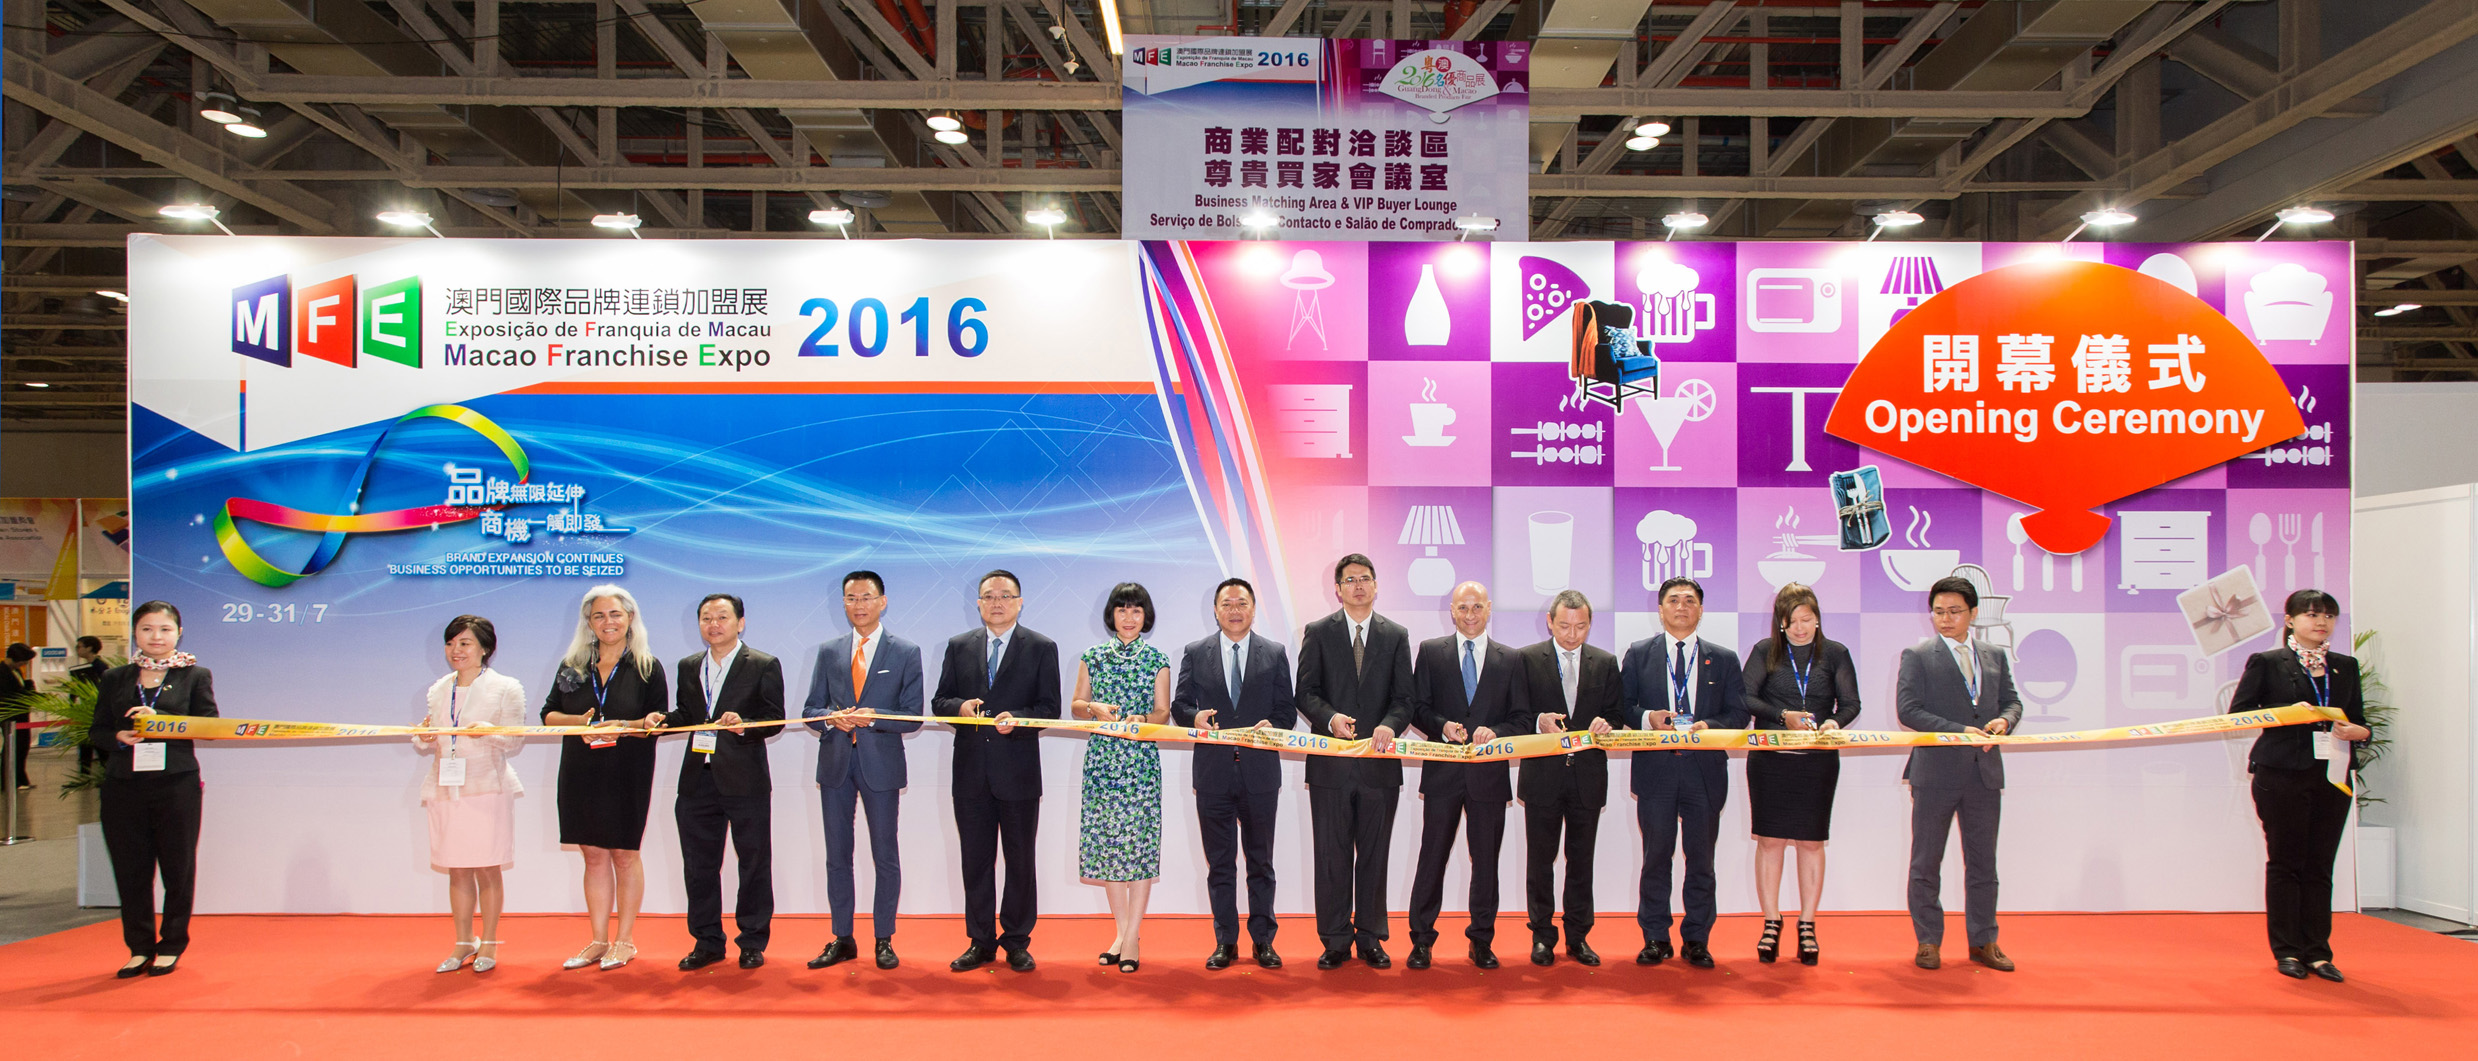 Opening ceremony of 2016 MFE